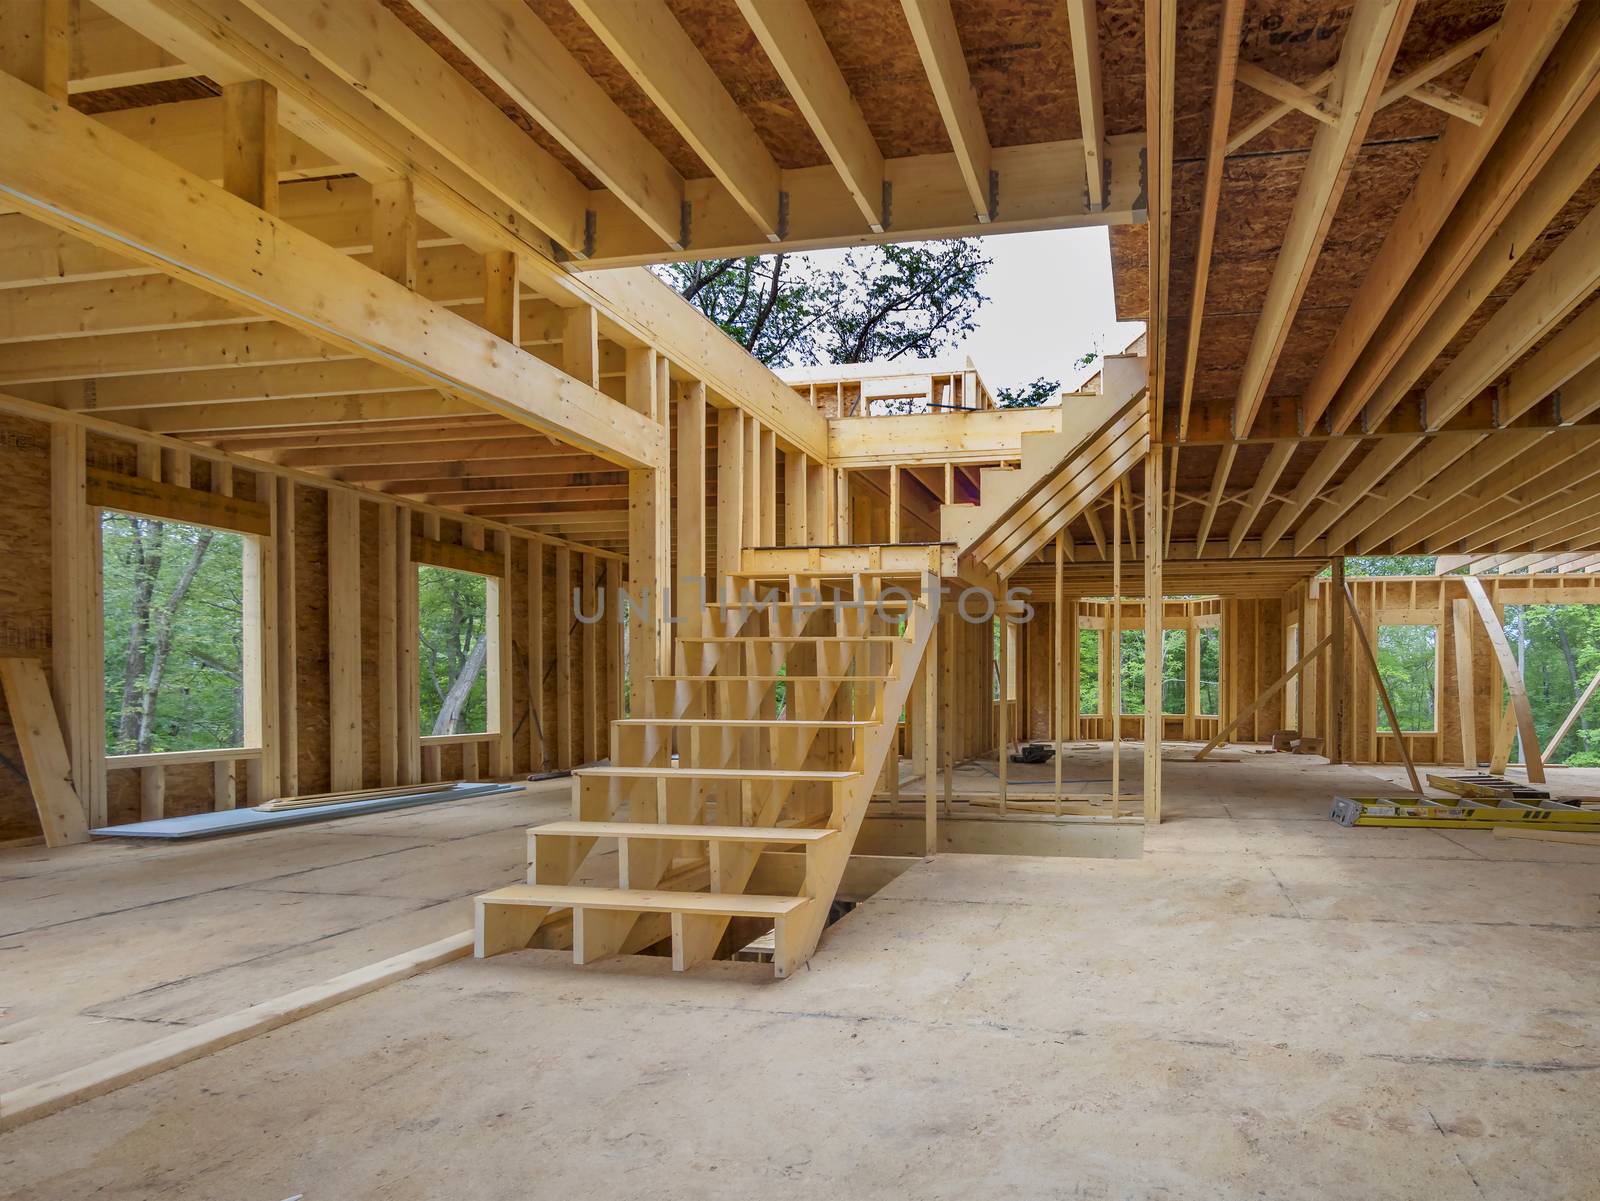 New house interior construction with framing posts and staircase